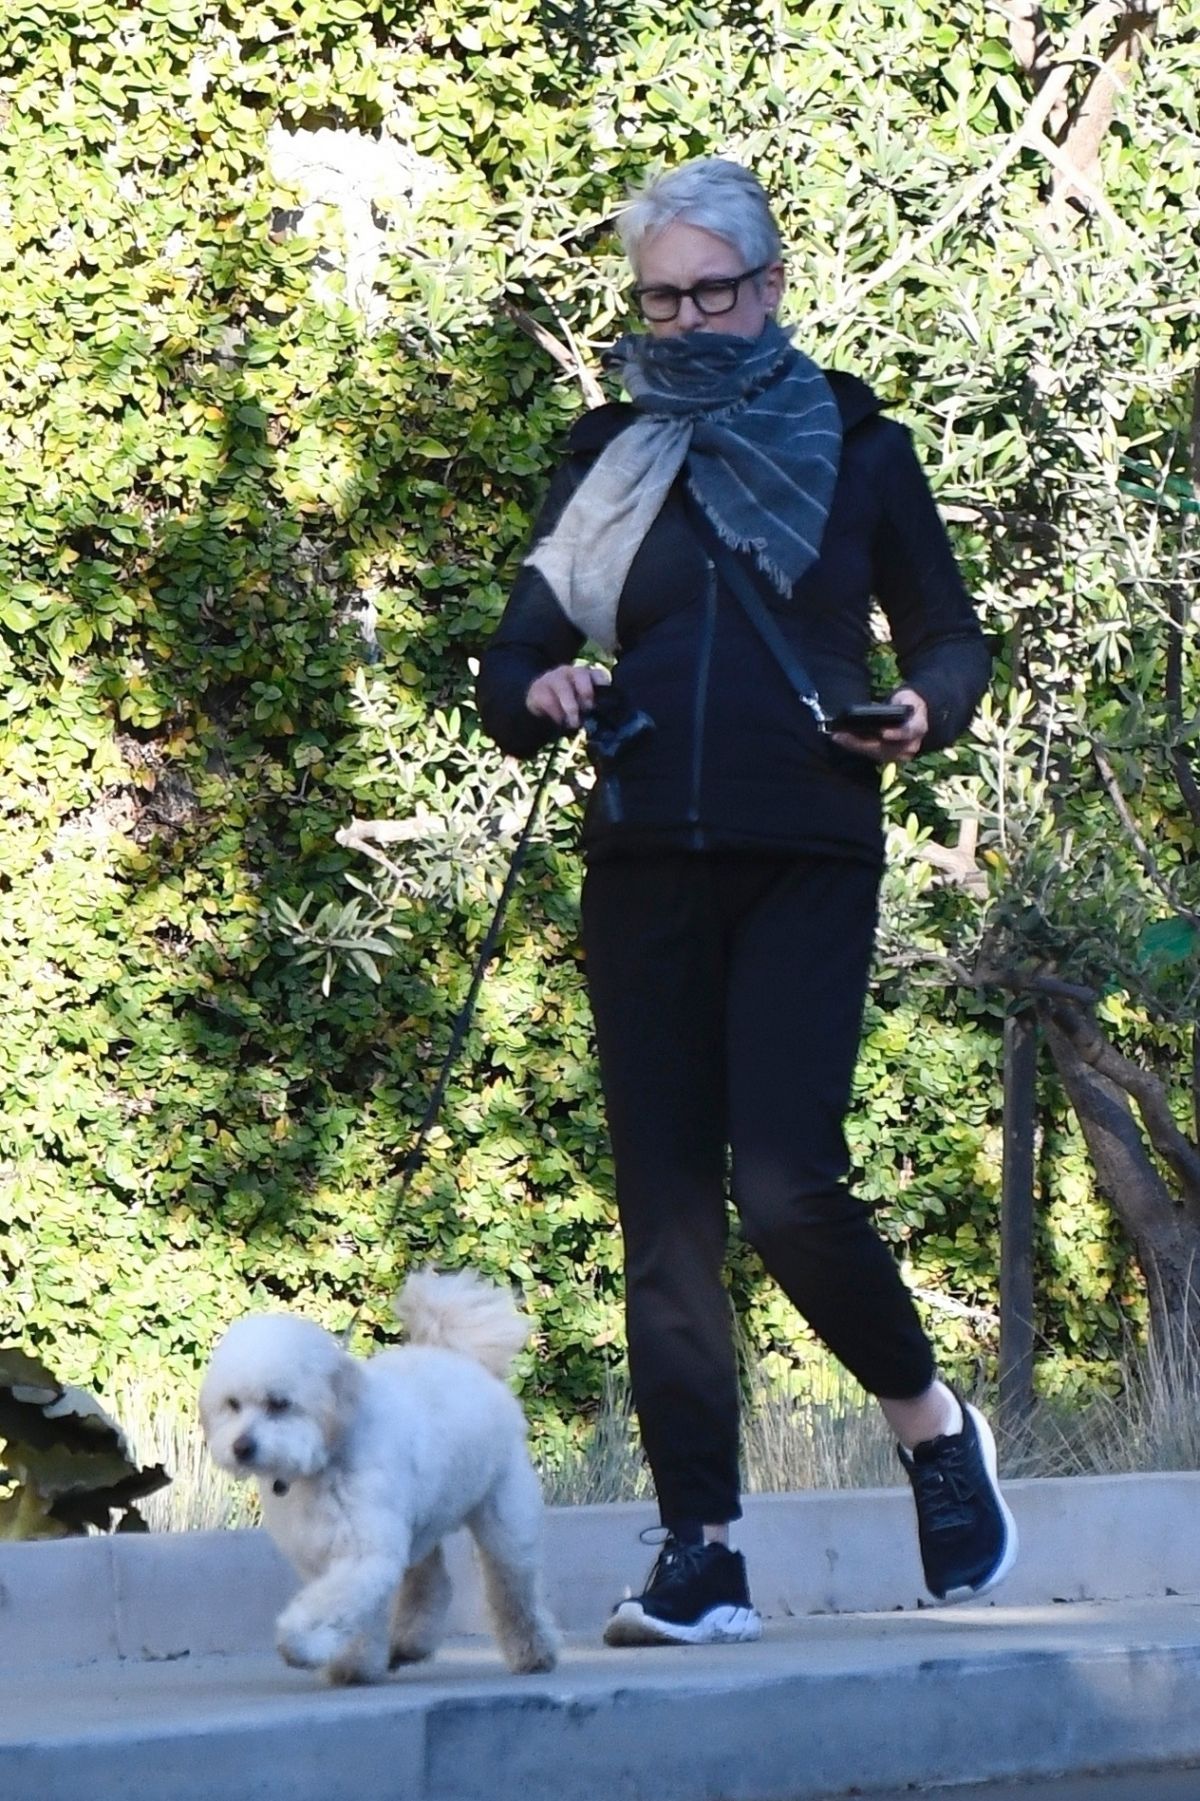 jamie-lee-curtis-out-with-her-dog-in-los-angeles-12-19-2020-1.jpg